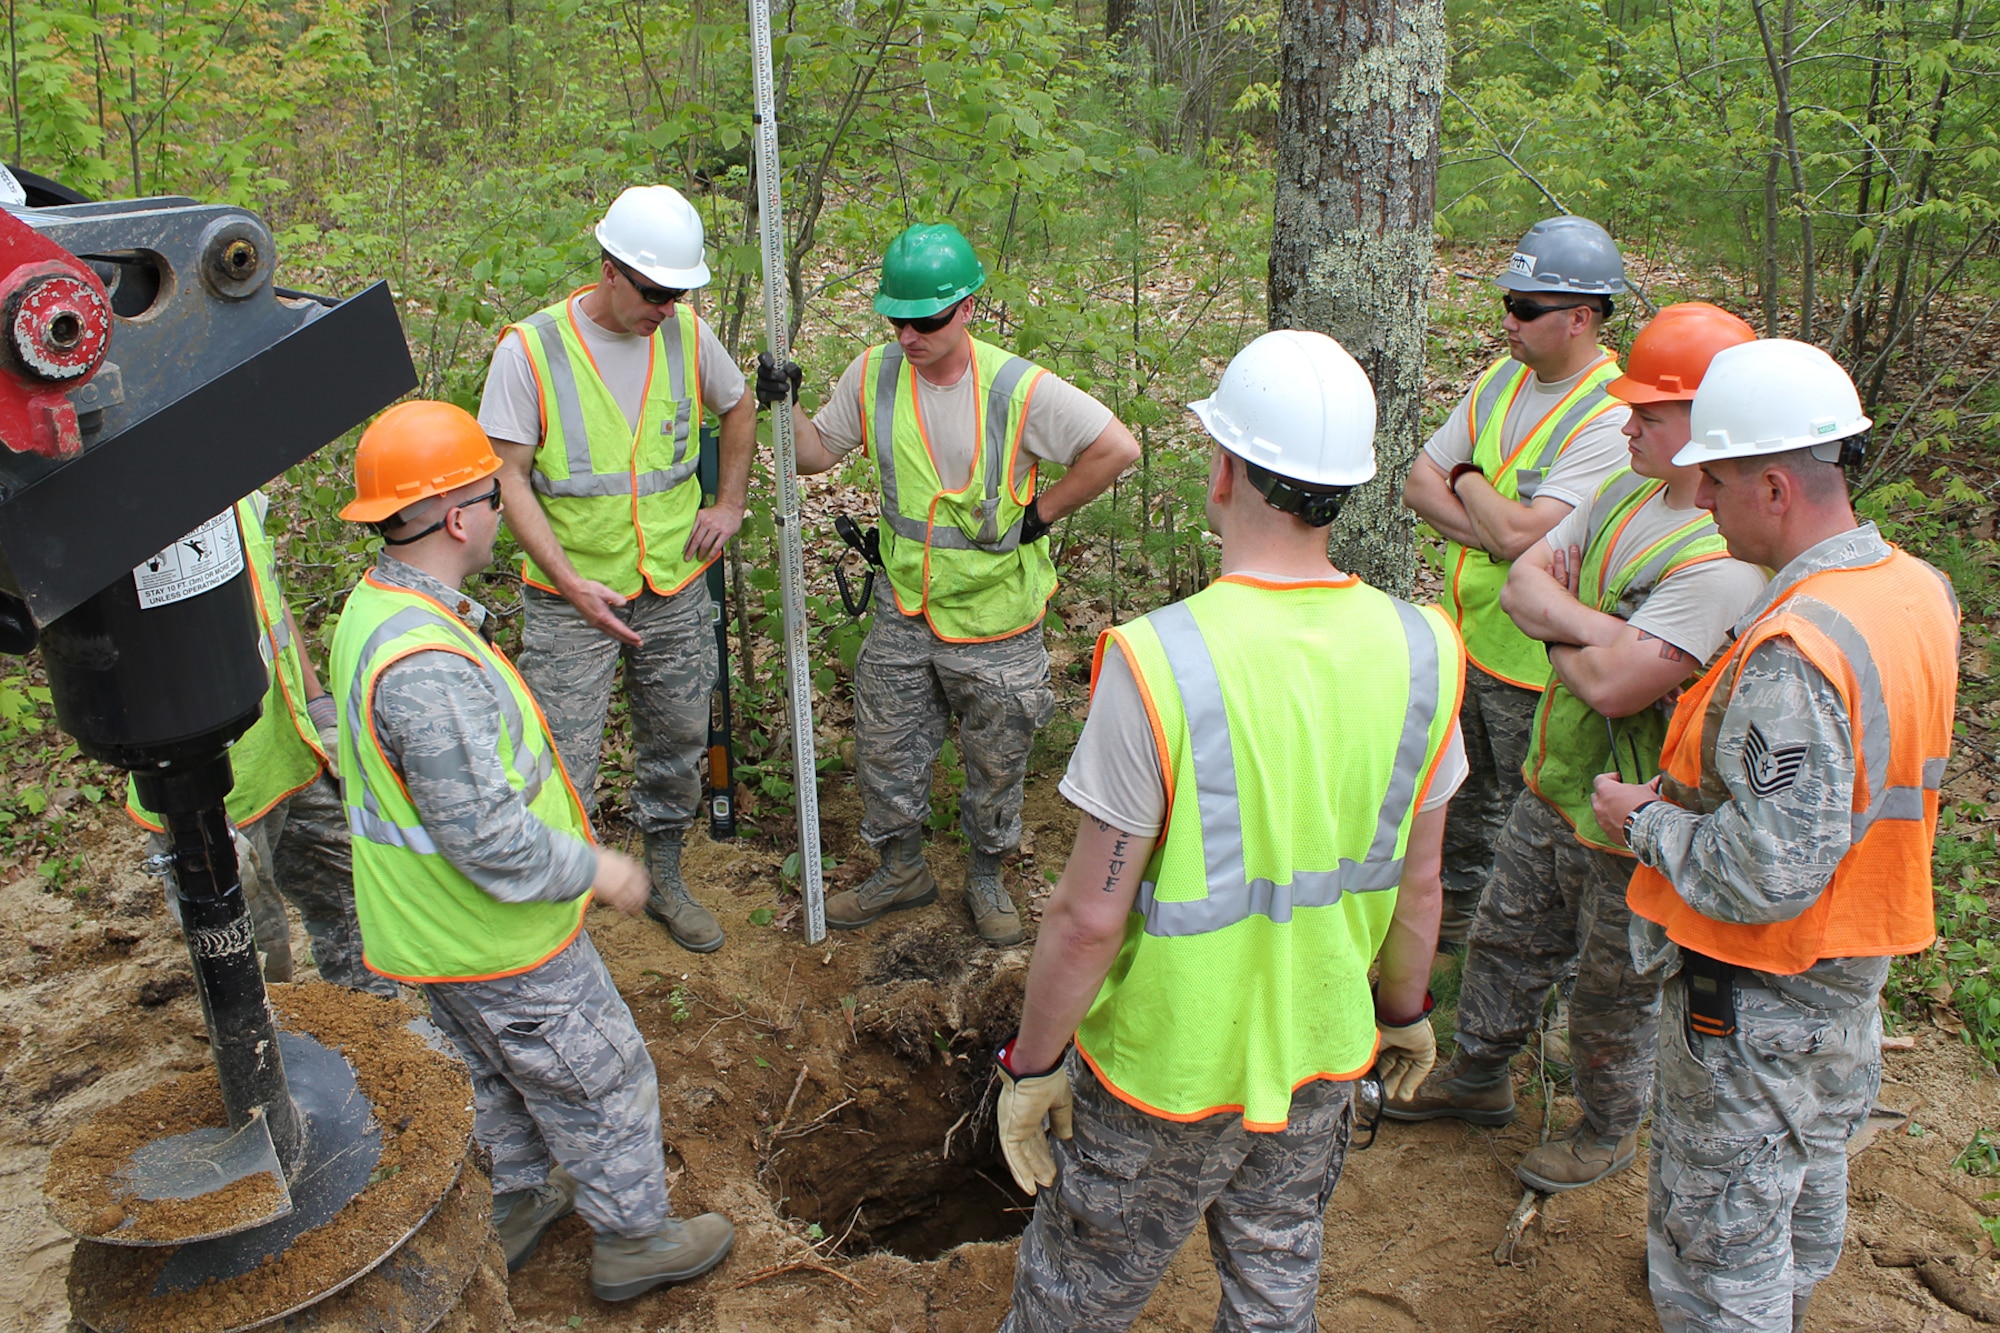 140520-Z-VA676-032 – Airmen from the 127th Civil Engineer Squadron, Selfridge Air National Guard Base, Mich., have a quick planning session while preparing a foundation for a new cabin at Camp Hind Boy Scout Camp, Raymond, Maine, May 20, 2014. The Airmen, along with Marine Corps Reservists and Army Reservists, are working on various construction projects at the camp during an Innovative Readiness Training mission, which allows military personnel to get training in various tasks and a community organization, in this case the Boy Scouts, to benefit from the work. (U.S. Air National Guard photo by Technical Sgt. Dan Heaton)